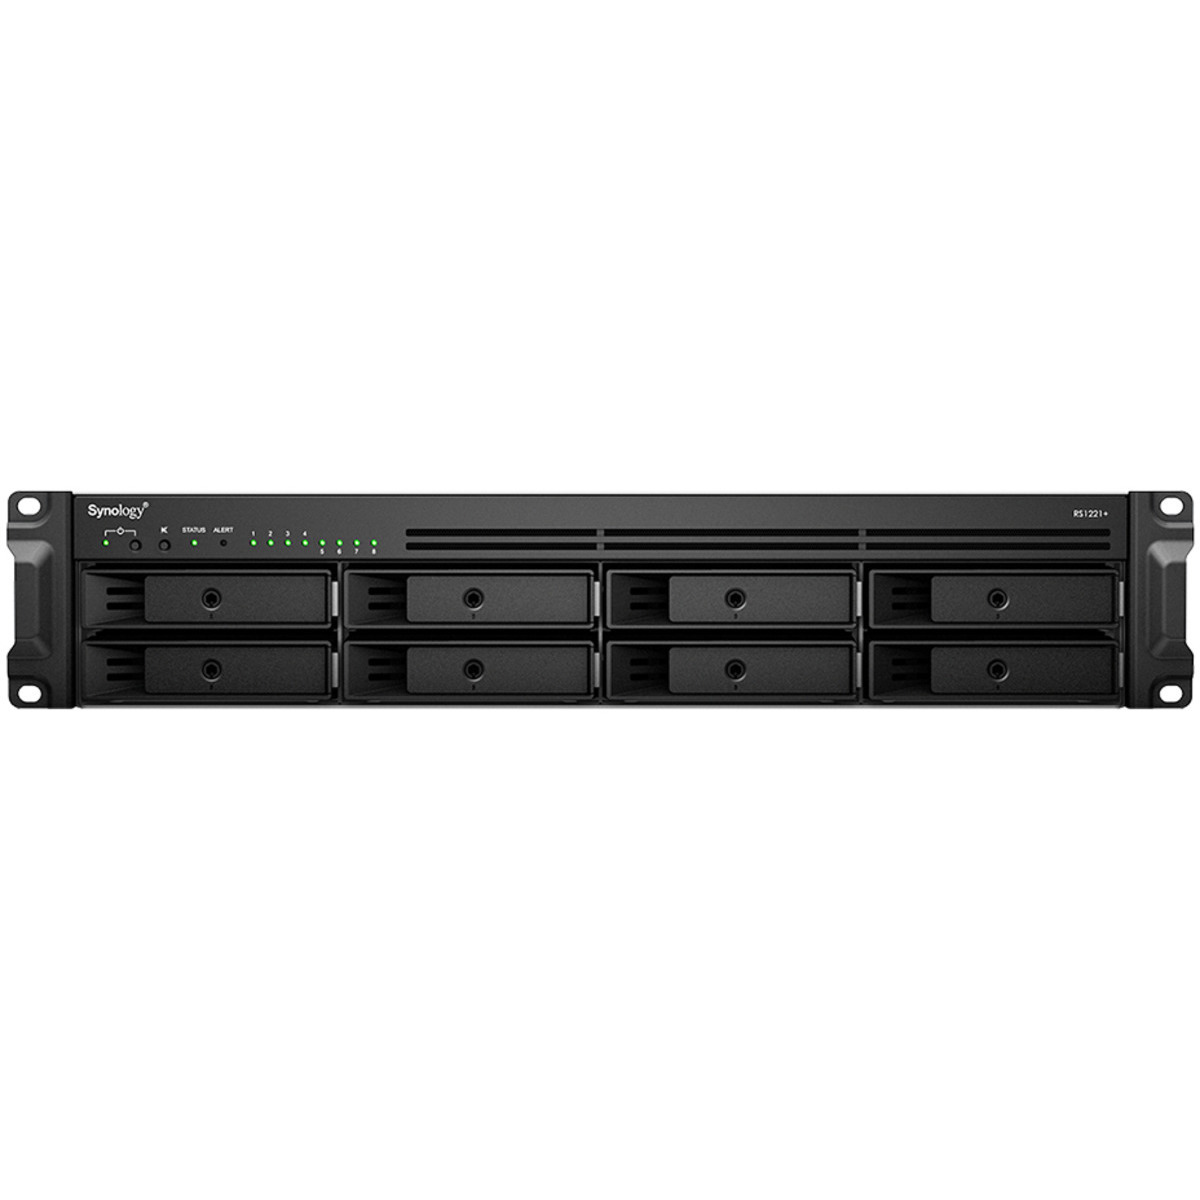 Synology RackStation RS1221+ 4tb 8-Bay RackMount Multimedia / Power User / Business NAS - Network Attached Storage Device 4x1tb Samsung 870 EVO MZ-77E1T0BAM 2.5 560/530MB/s SATA 6Gb/s SSD CONSUMER Class Drives Installed - Burn-In Tested RackStation RS1221+